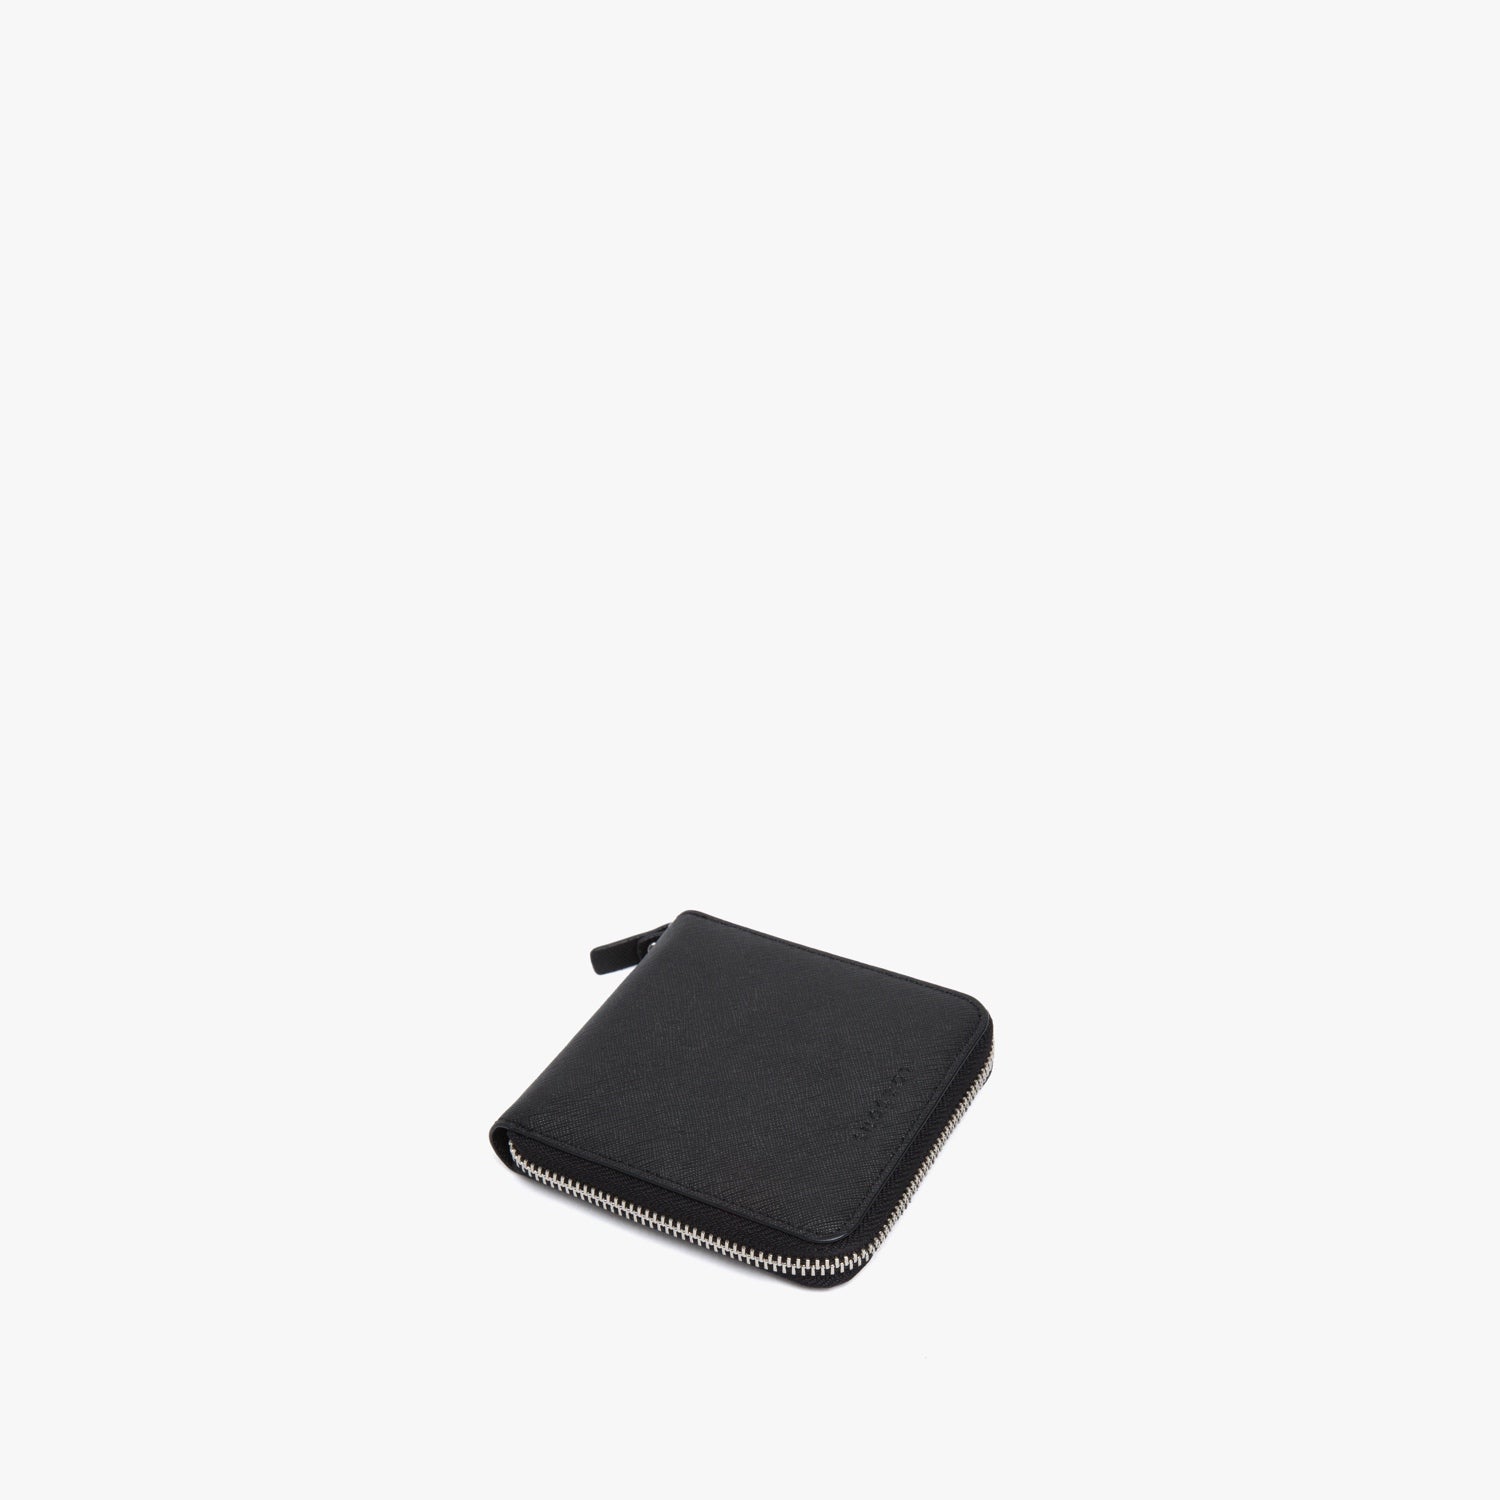 The Small Wallet - Saffiano Leather - Black / Silver / Grey